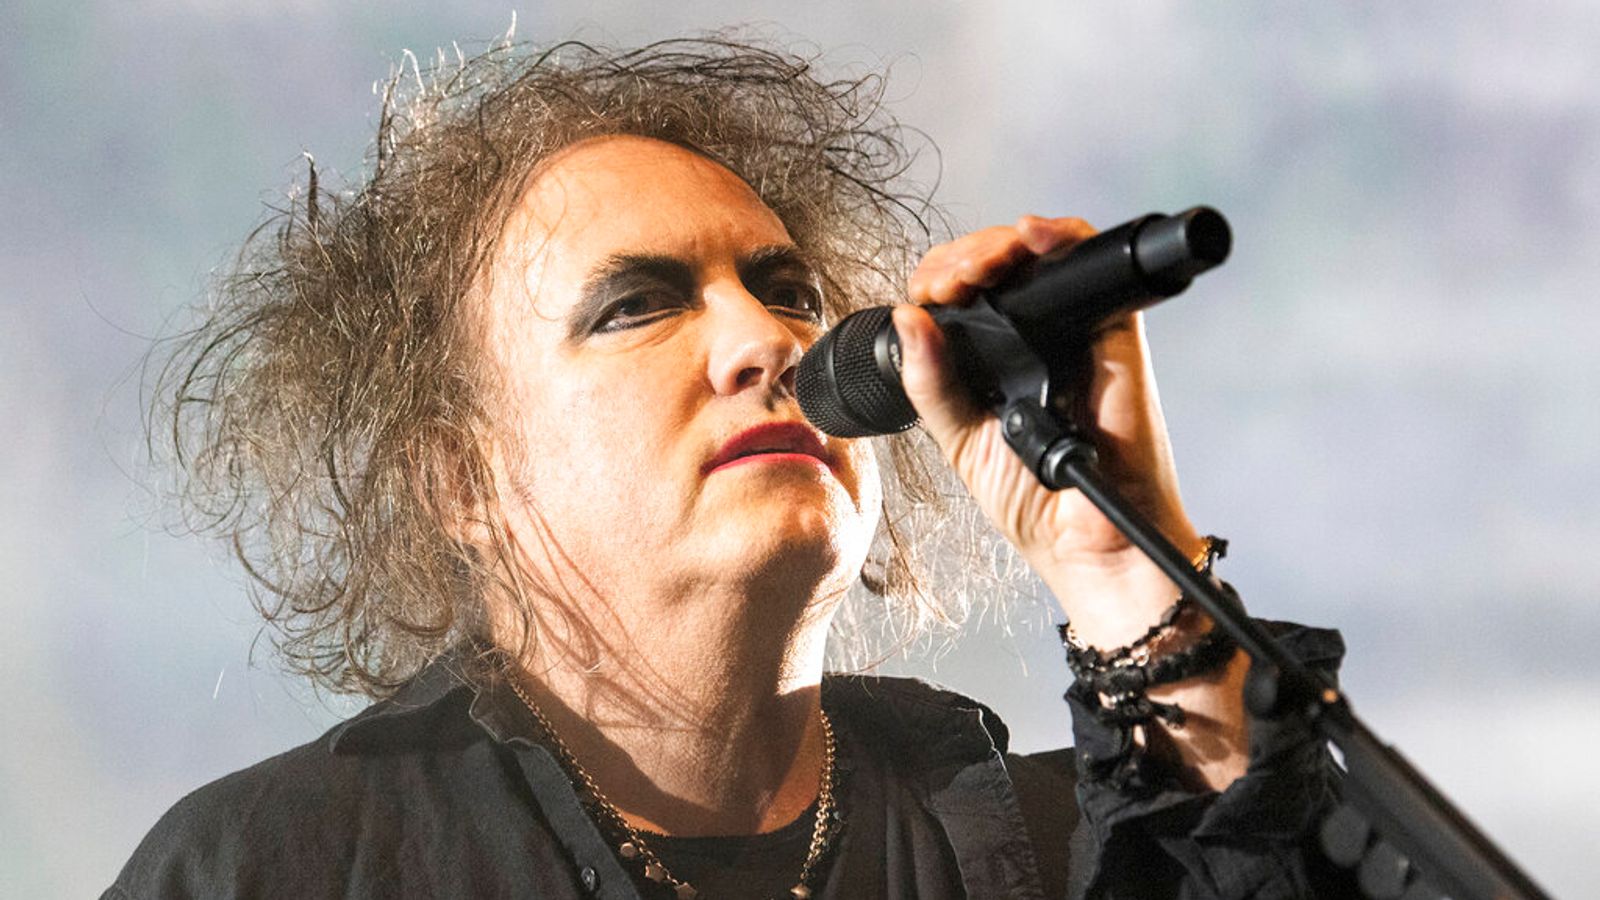 The Cure's Robert Smith persuades Ticketmaster to partially refund 'unduly high' fees